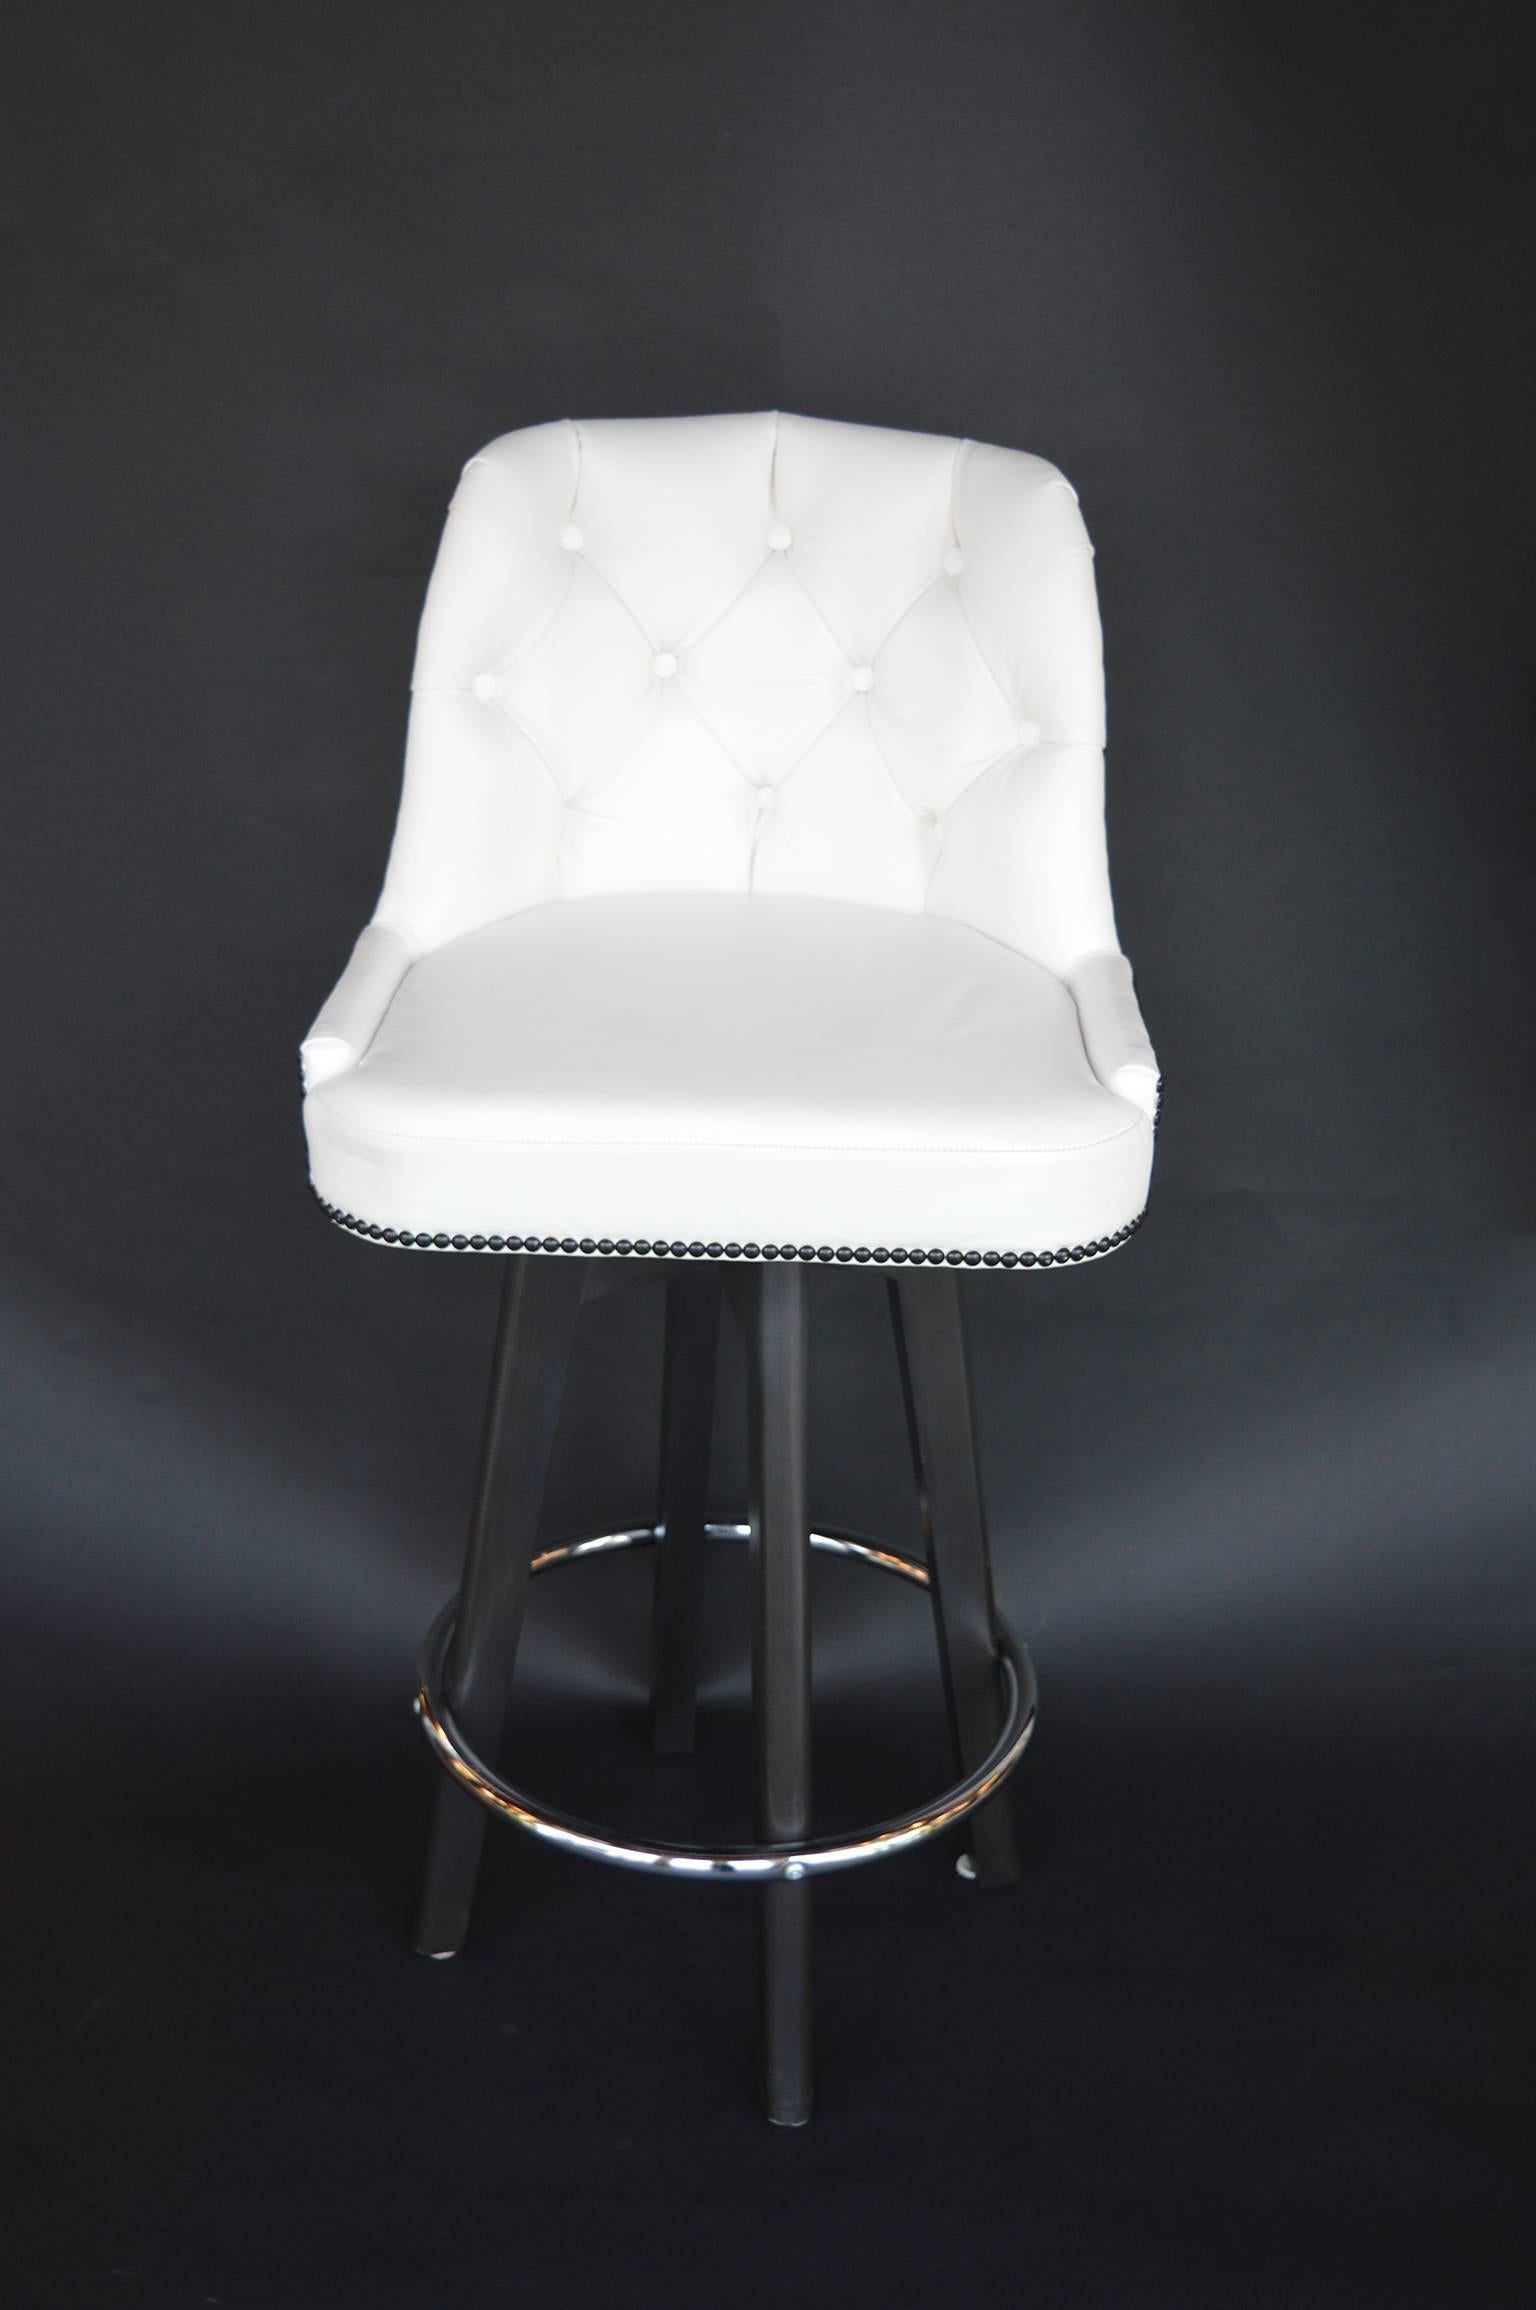 Set of three white leather bar stools. Tufted backs with black nailhead accent.